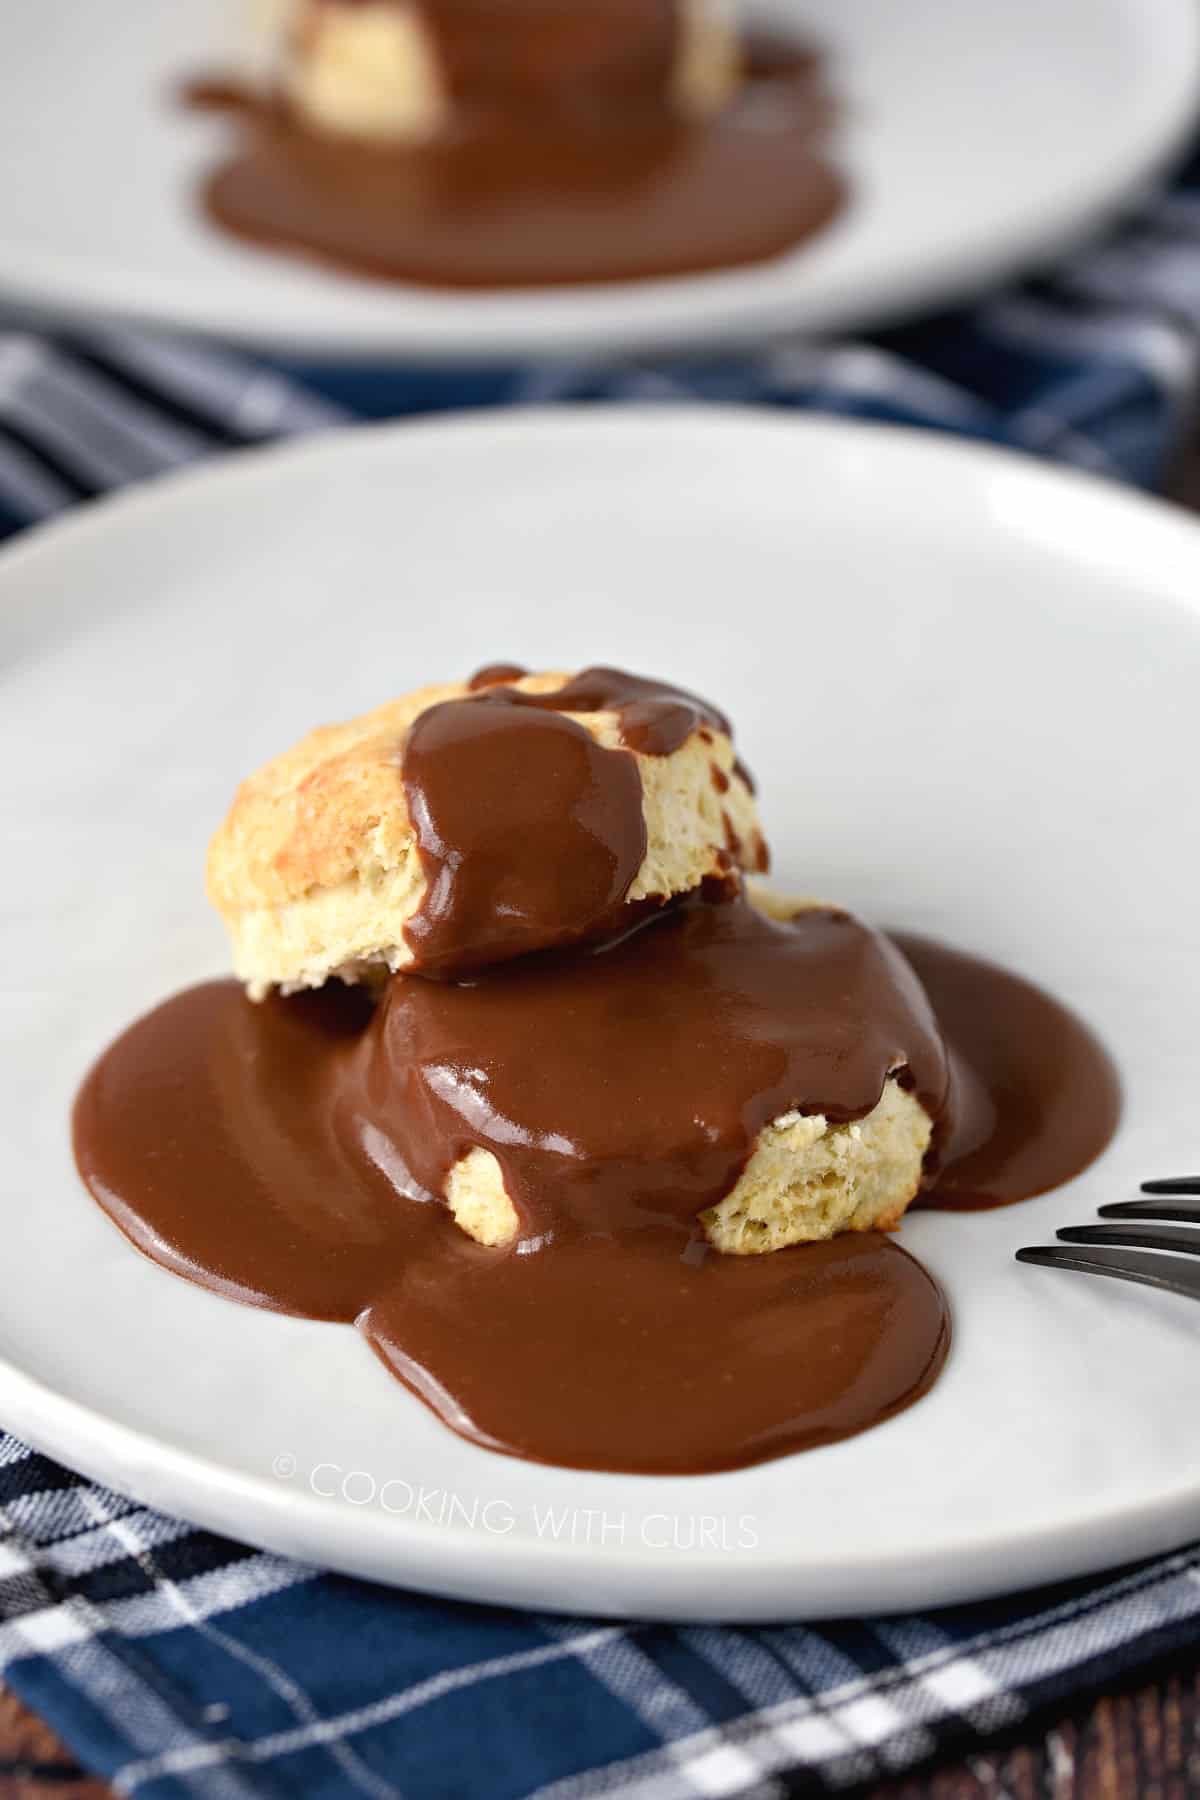 A biscuit split in half and covered with thick, chocolate gravy on a white plate with a second plate in the background.